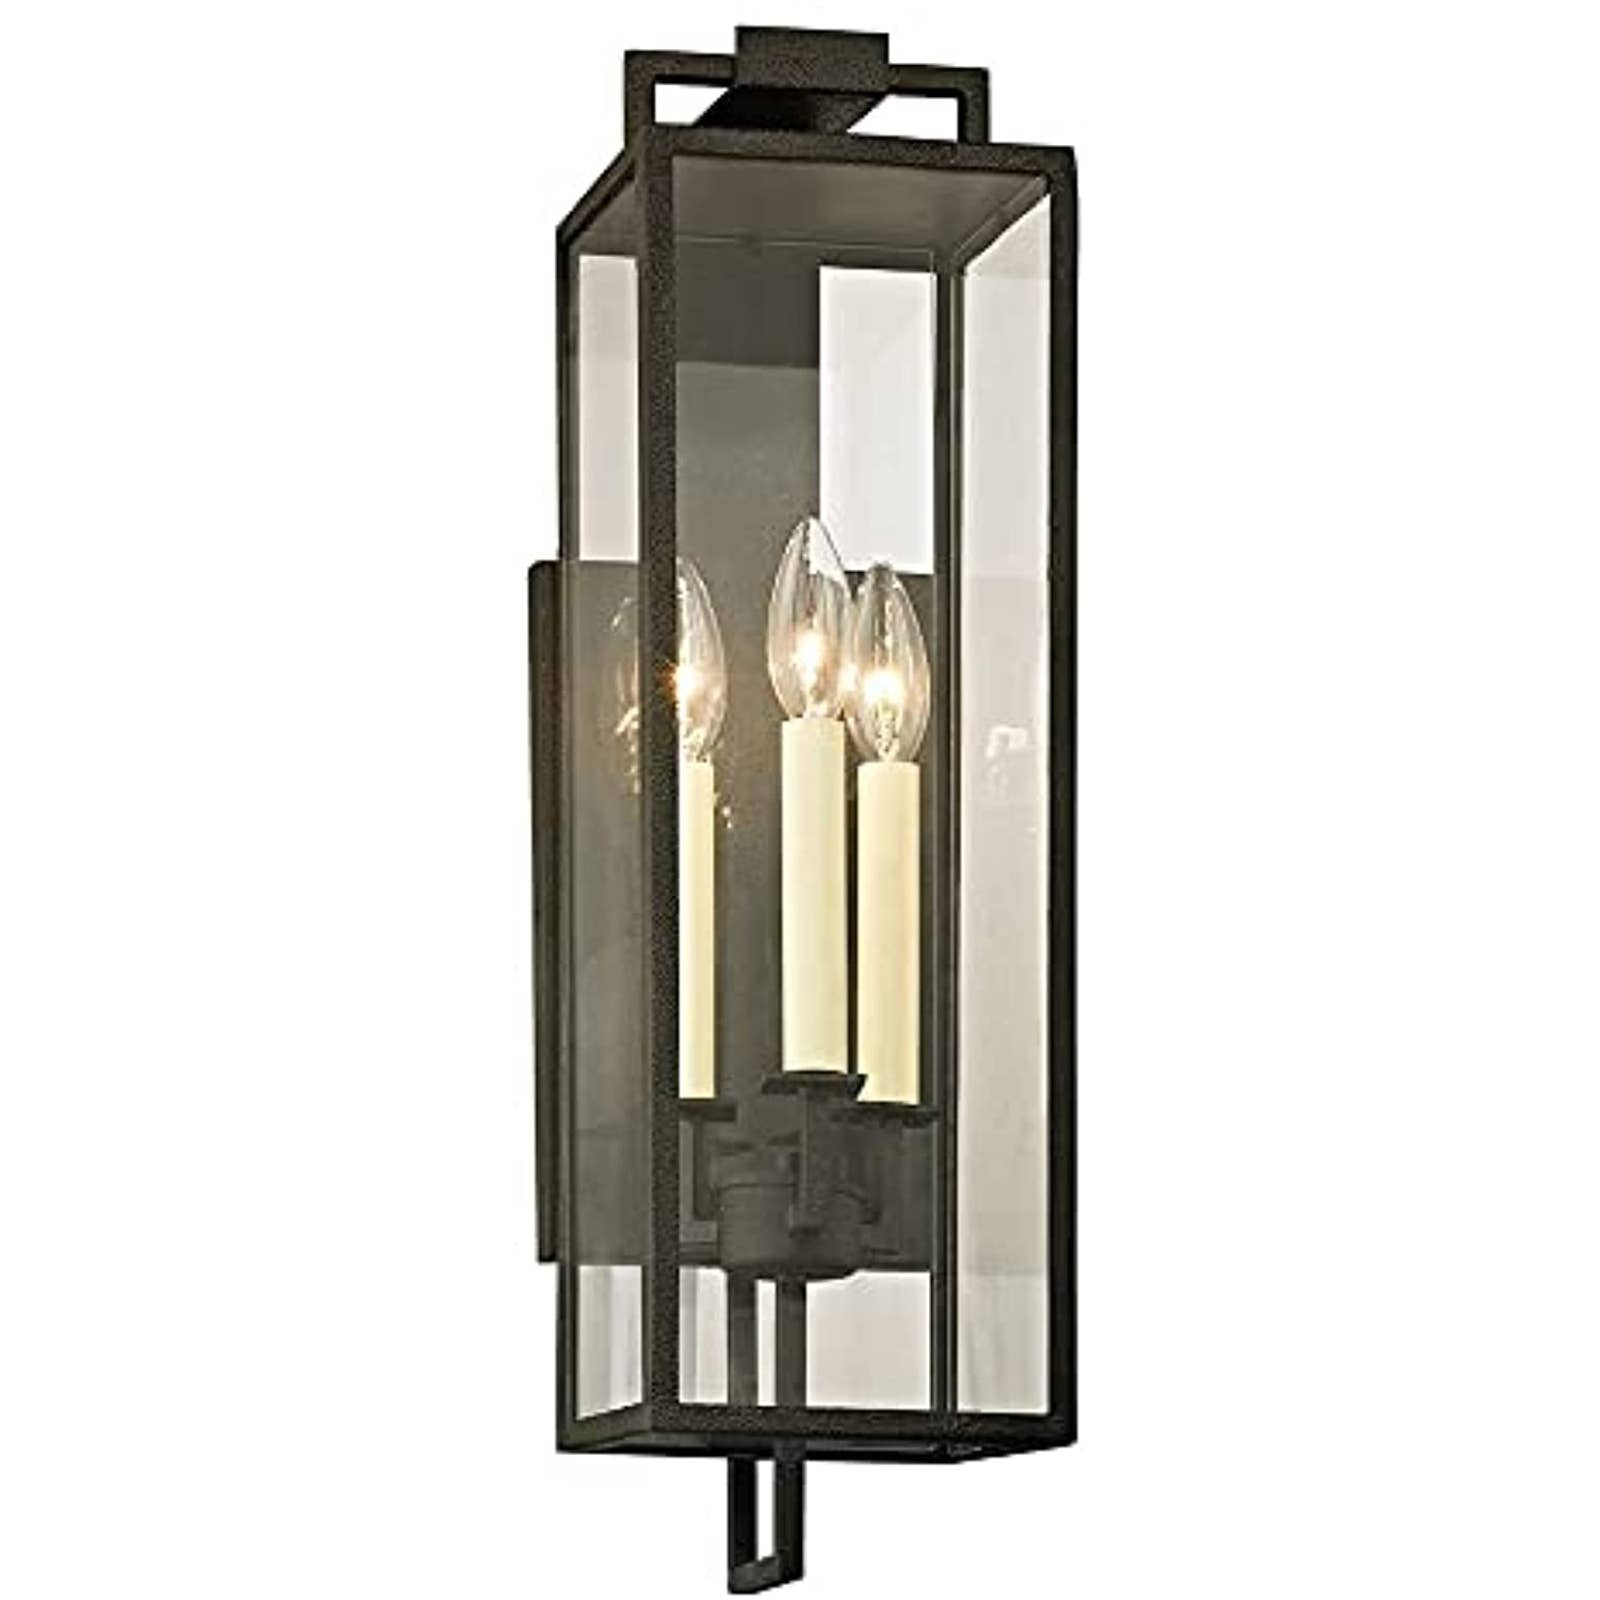 Troy Lighting B6382 Beckham-3 Light Outdoor Wall Mount-6 Inches Wide by 21.5 Inches High, Forged Iron Finish with Clear Glass